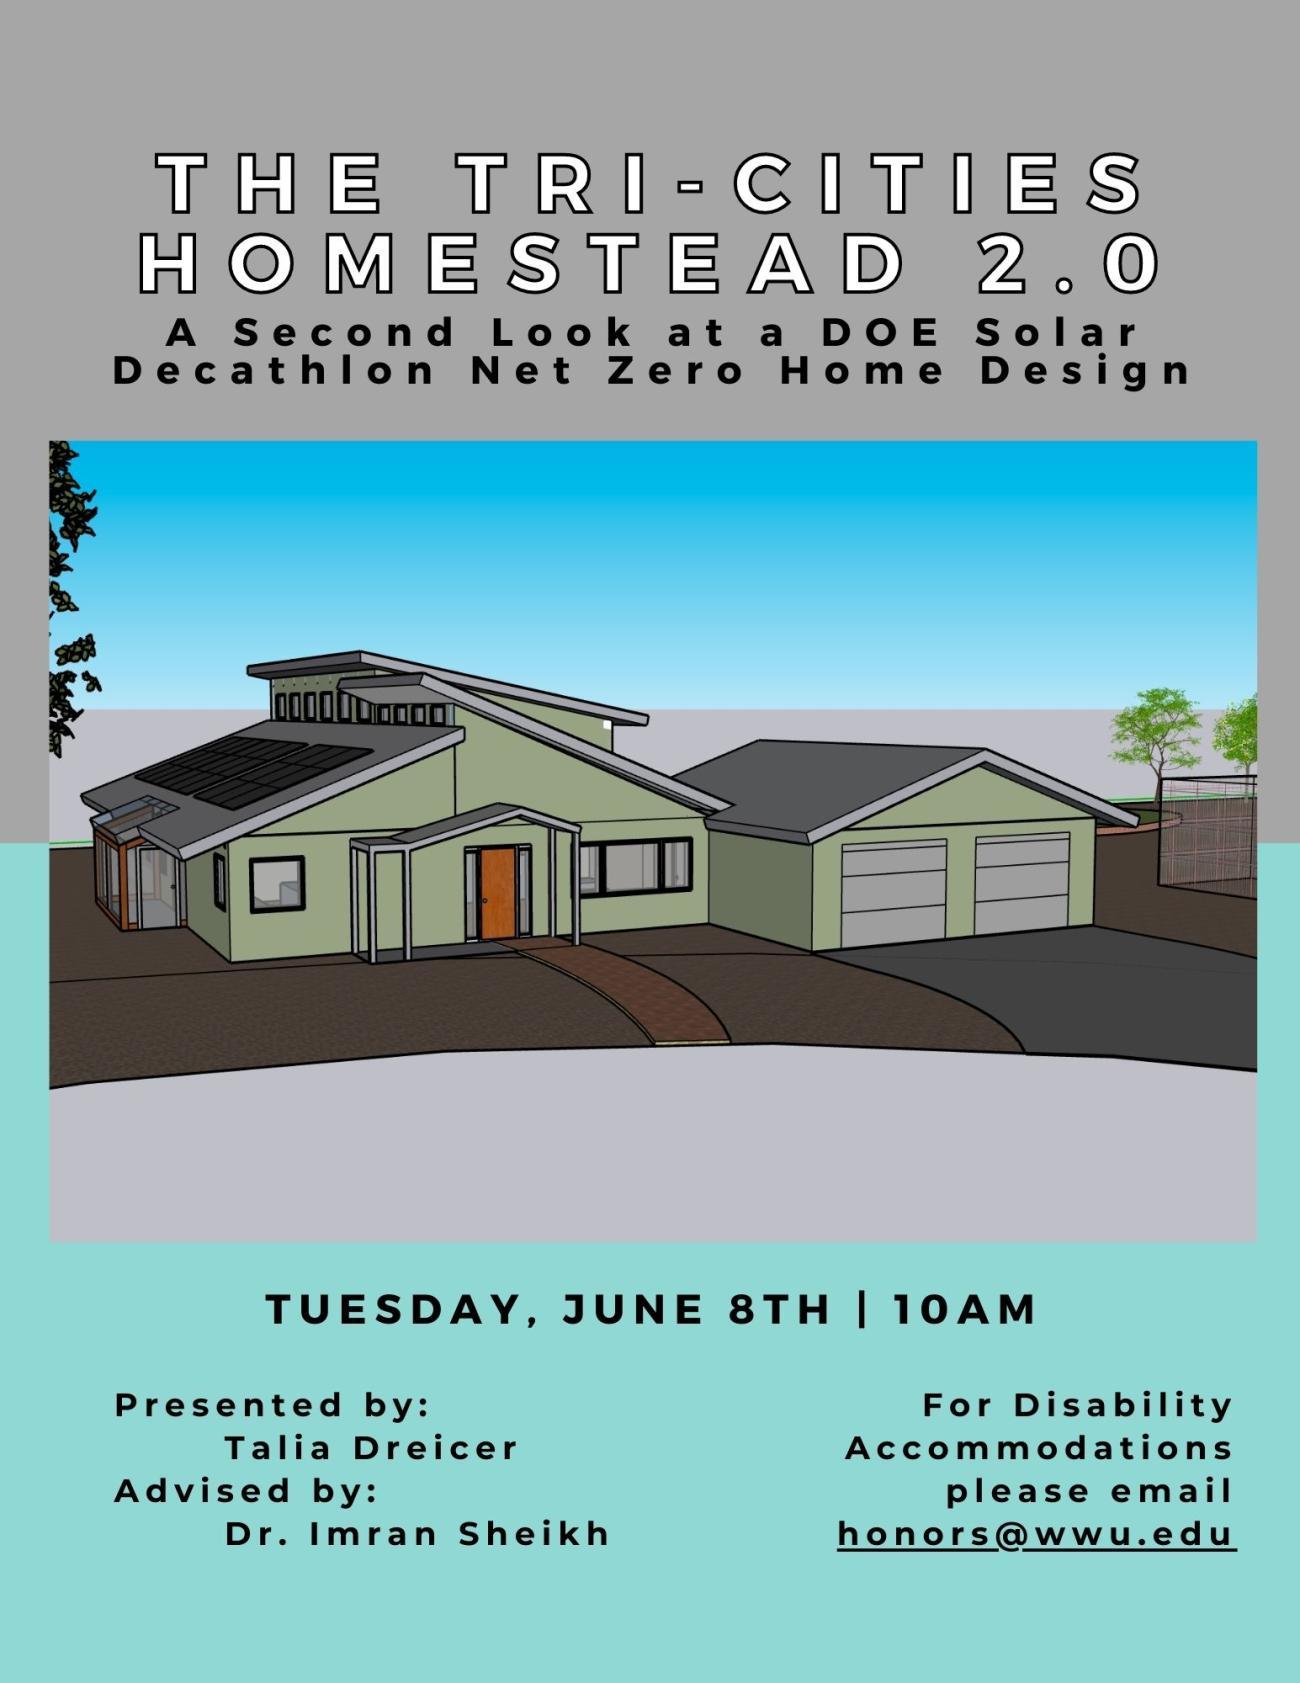 Bi-colored background with a house featuring an attached garage, clearstory windows, solar panels, and a sunspace. Text reads: "The Tri-Cities Homestead 2.0: A Second Loot at a DOE Solar Decathlon Net Zero Home Design. Tuesday, June 8th at 10am. Presented by: Talia Dreicer. Advised by: Dr. Imran Sheikh. For Disability Accommodations please email honors@wwu.edu".